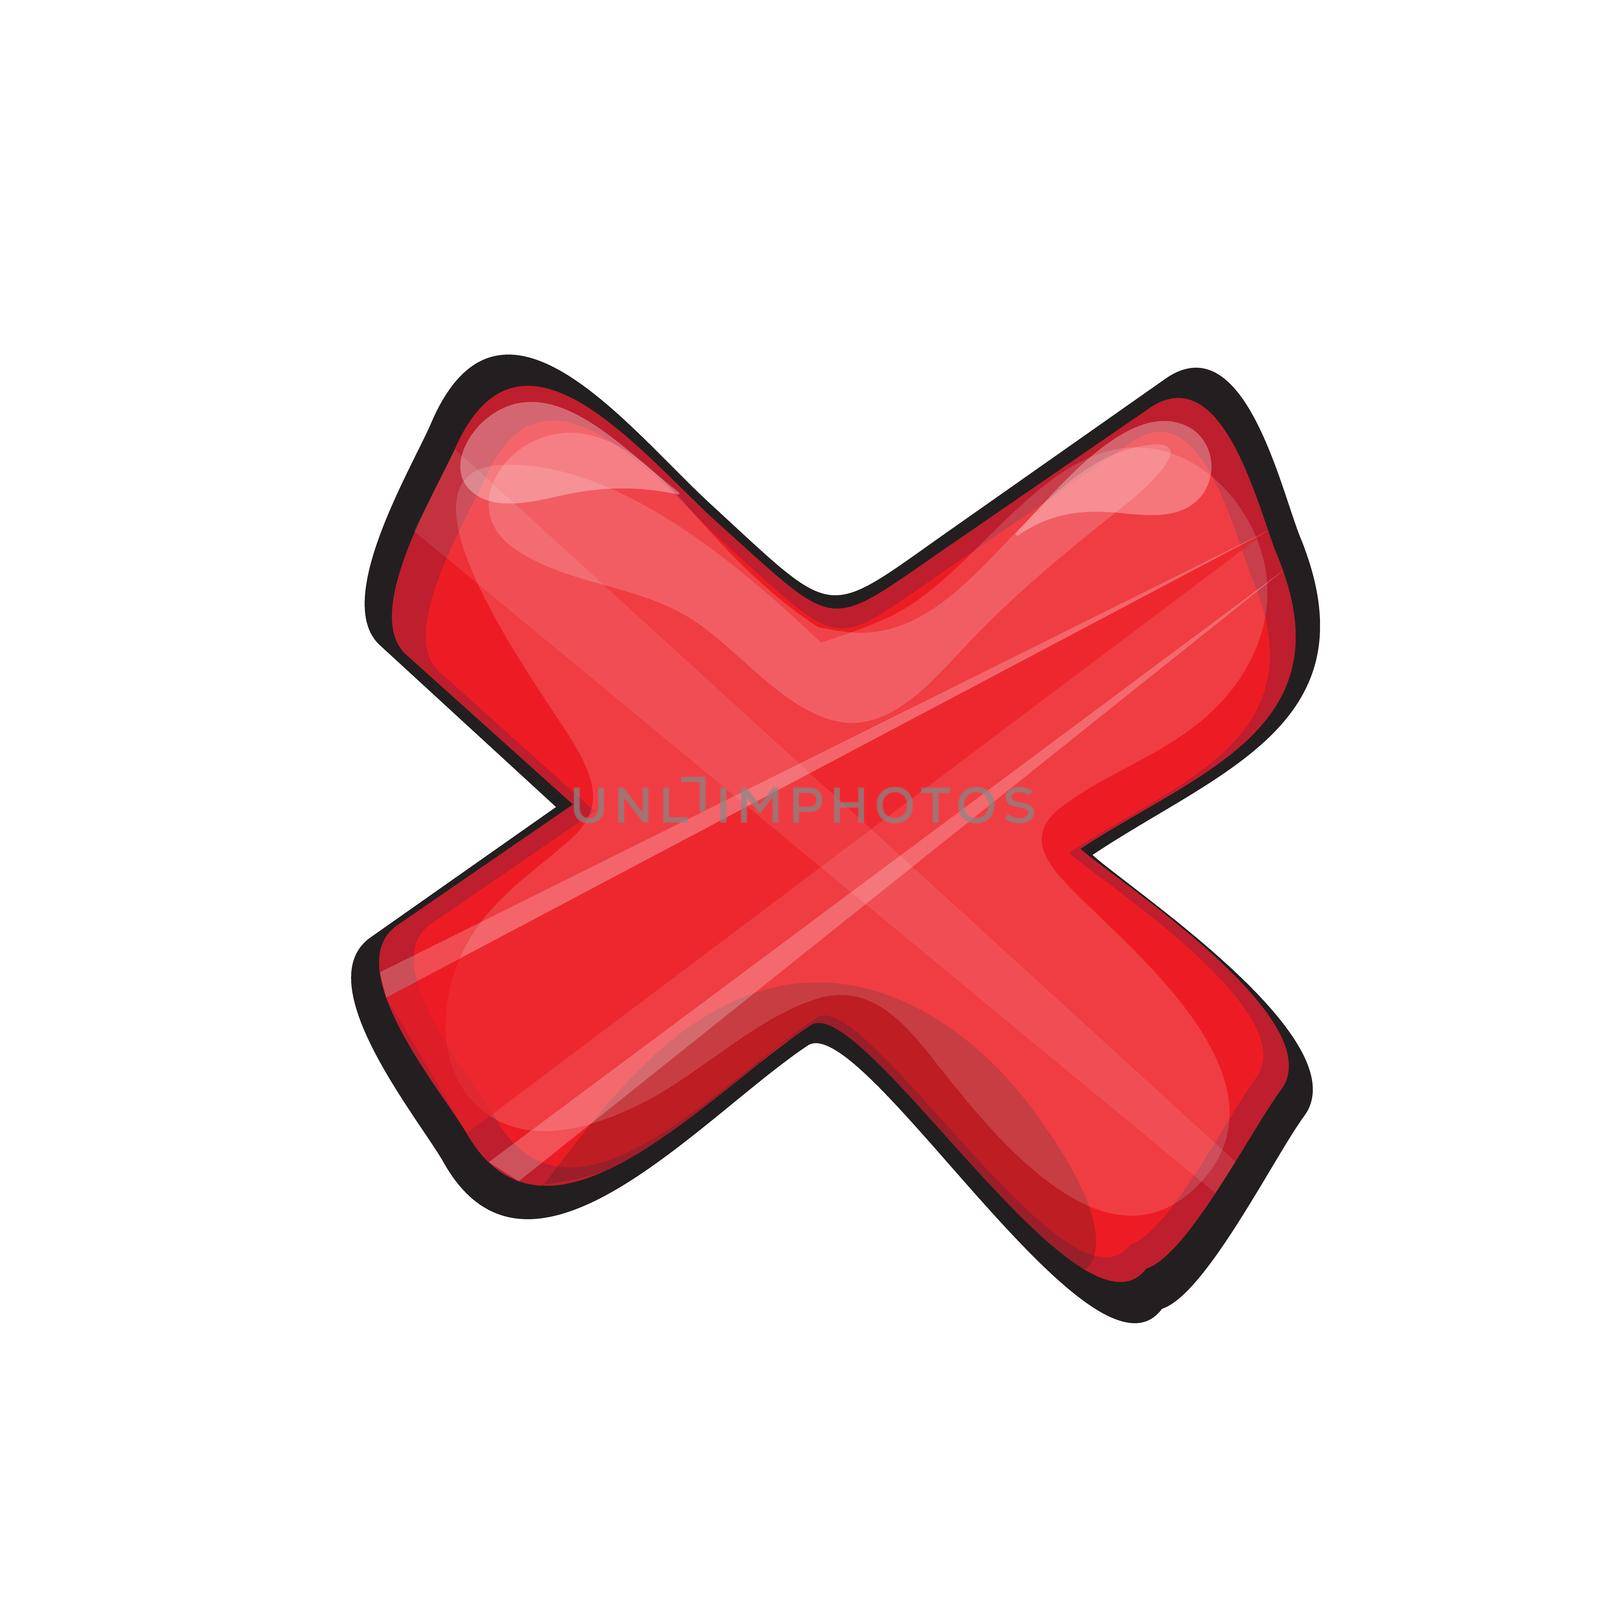 Cross icon for games, applications. Cute cartoon buttons design. Isolated vector, ui.